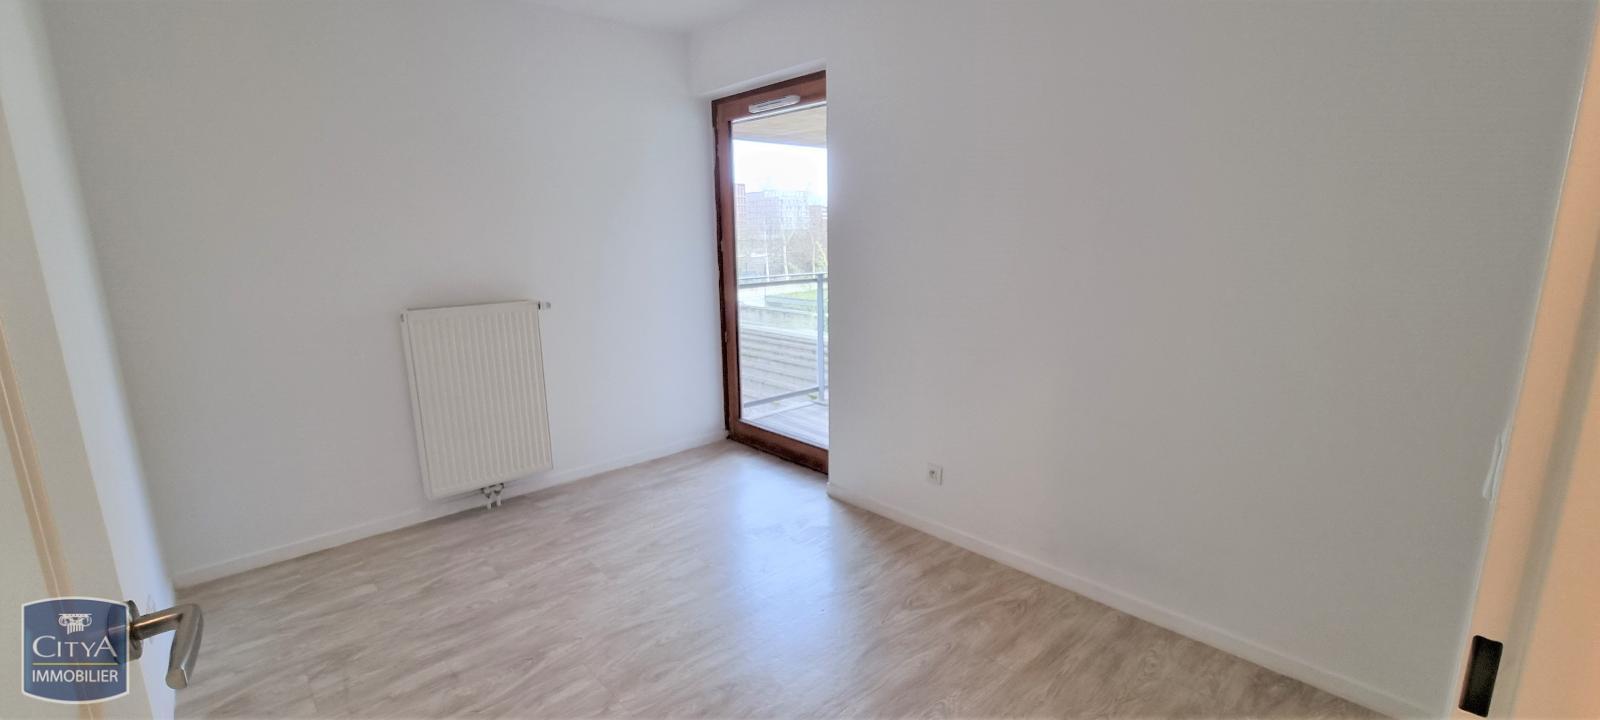 Photo 6 appartement Lille